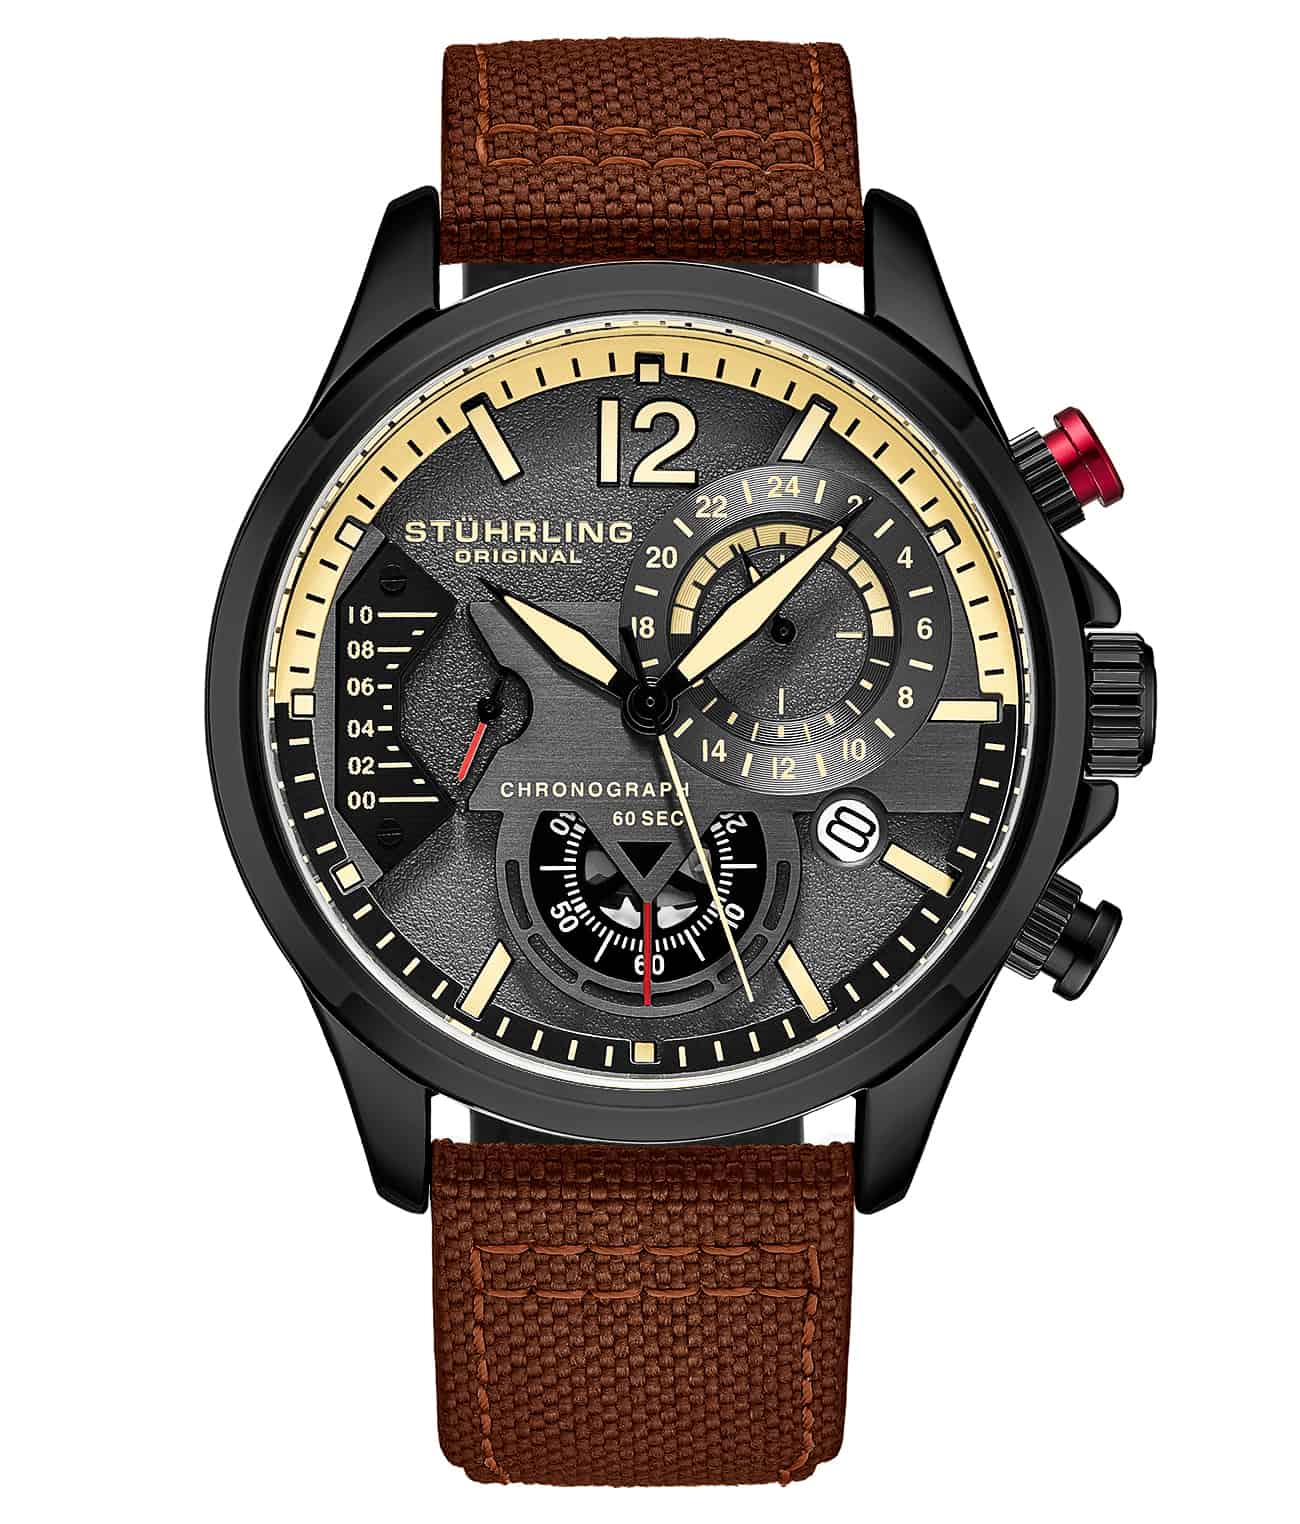 Grey Dial / Black Case / Brown Leather Strap Black Tang Buckle